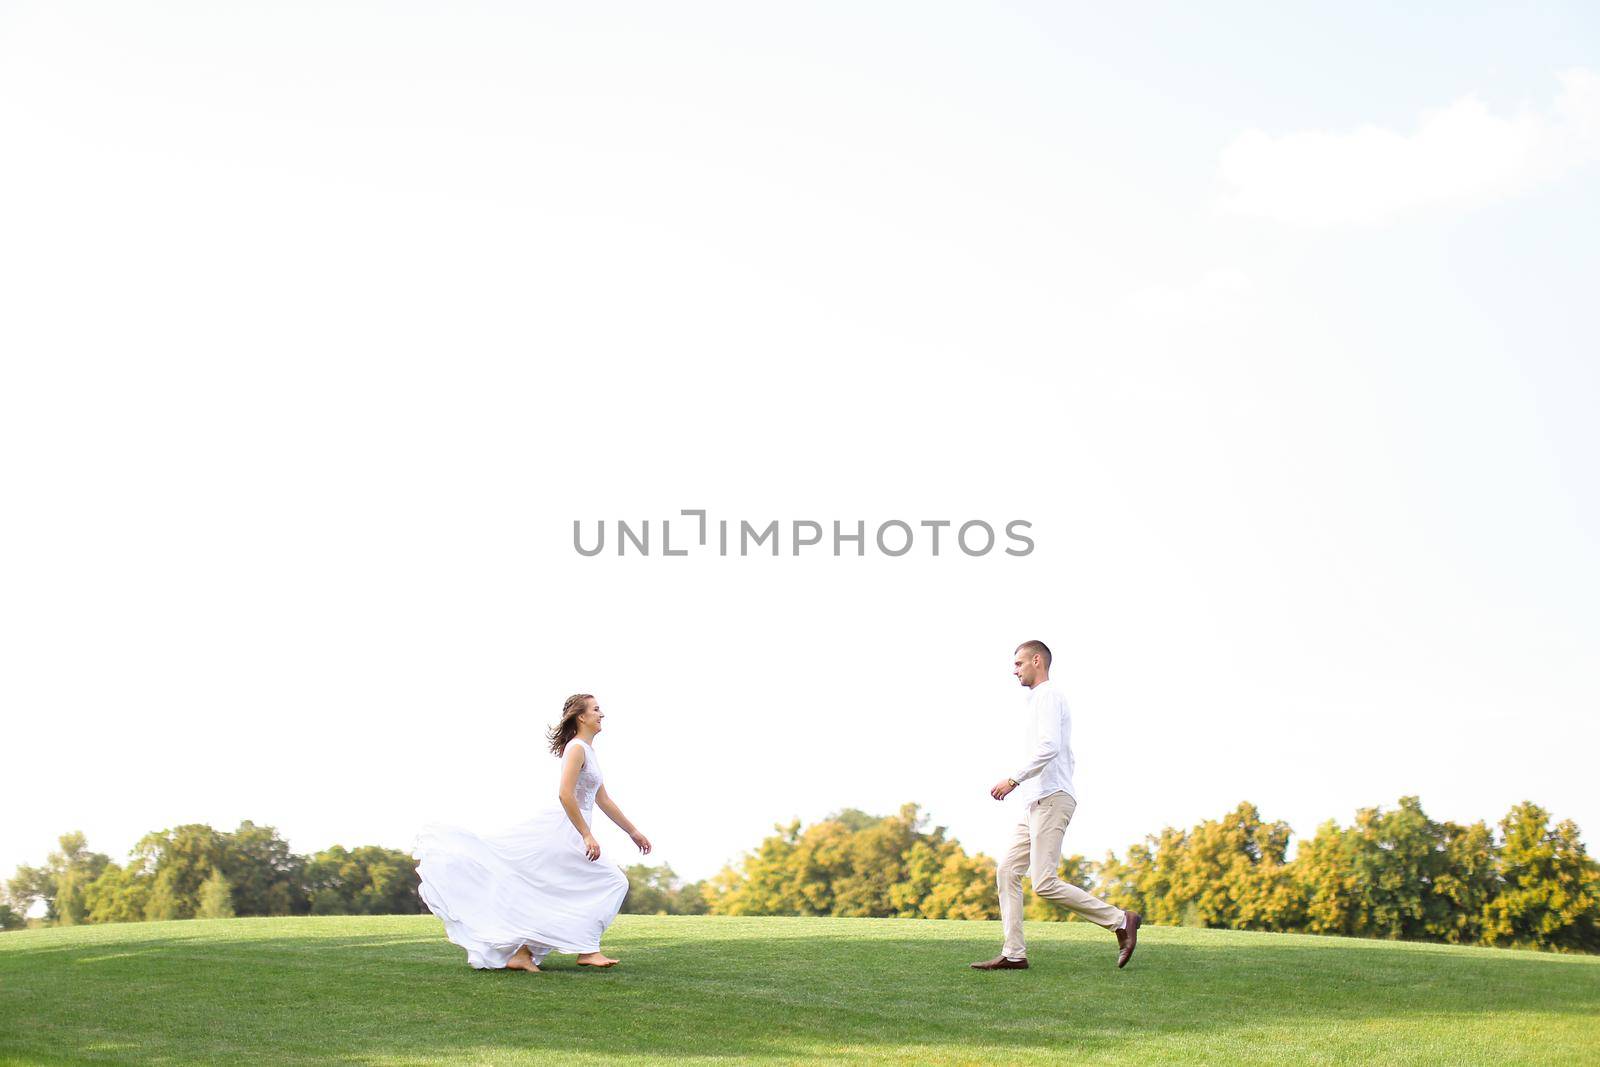 Bride and groom running to each other on grass in white sky background. Concept of wedding photo session on nature.